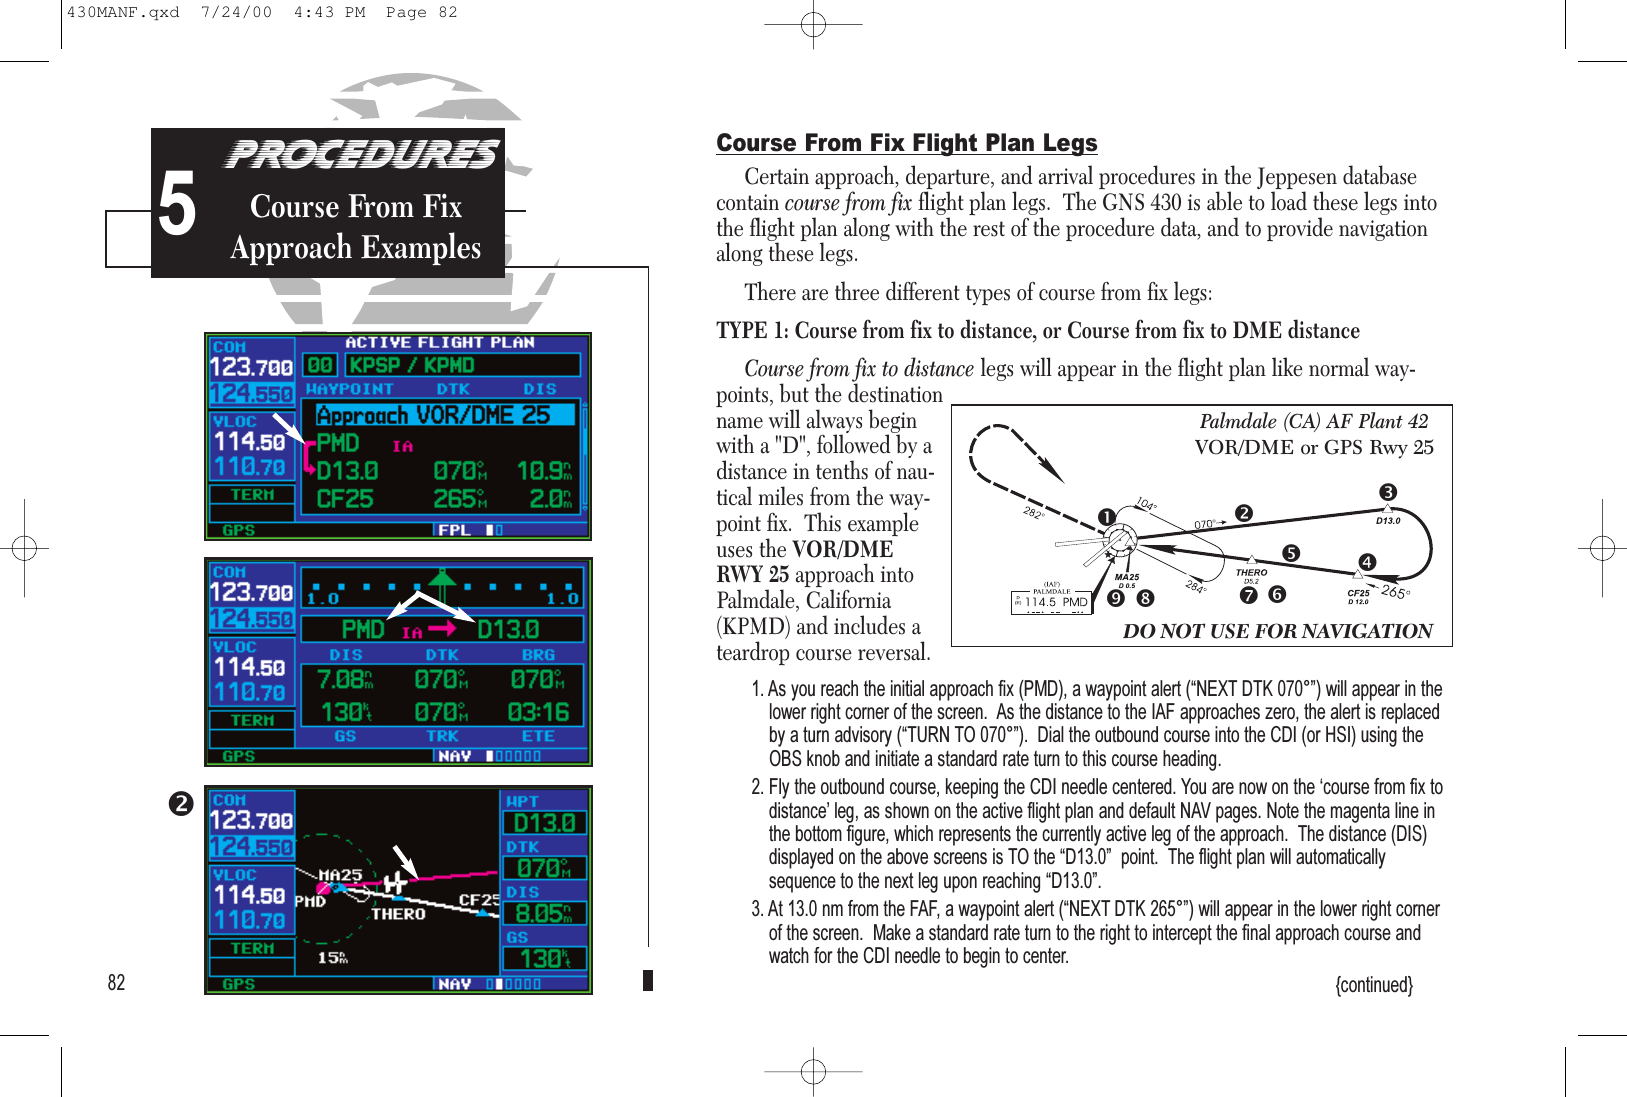 825Course From Fix Flight Plan LegsCertain approach, departure, and arrival procedures in the Jeppesen databasecontain course from fix flight plan legs.  The GNS 430 is able to load these legs intothe flight plan along with the rest of the procedure data, and to provide navigationalong these legs.There are three different types of course from fix legs:TYPE 1: Course from fix to distance, or Course from fix to DME distanceCourse from fix to distance legs will appear in the flight plan like normal way-points, but the destinationname will always beginwith a &quot;D&quot;, followed by adistance in tenths of nau-tical miles from the way-point fix.  This exampleuses the VOR/DMERWY 25 approach intoPalmdale, California(KPMD) and includes ateardrop course reversal.1. As you reach the initial approach fix (PMD), a waypoint alert (NEXT DTK 070°) will appear in thelower right corner of the screen.  As the distance to the IAF approaches zero, the alert is replacedby a turn advisory (TURN TO 070°).  Dial the outbound course into the CDI (or HSI) using theOBS knob and initiate a standard rate turn to this course heading.2. Fly the outbound course, keeping the CDI needle centered. You are now on the course from fix todistance leg, as shown on the active flight plan and default NAV pages. Note the magenta line inthe bottom figure, which represents the currently active leg of the approach.  The distance (DIS)displayed on the above screens is TO the D13.0  point.  The flight plan will automaticallysequence to the next leg upon reaching D13.0.3. At 13.0 nm from the FAF, a waypoint alert (NEXT DTK 265°) will appear in the lower right cornerof the screen.  Make a standard rate turn to the right to intercept the final approach course andwatch for the CDI needle to begin to center.{continued}DO NOT USE FOR NAVIGATIONPalmdale (CA) AF Plant 42VOR/DME or GPS Rwy 25PROCEDURESCourse From FixApproach Examples430MANF.qxd  7/24/00  4:43 PM  Page 82